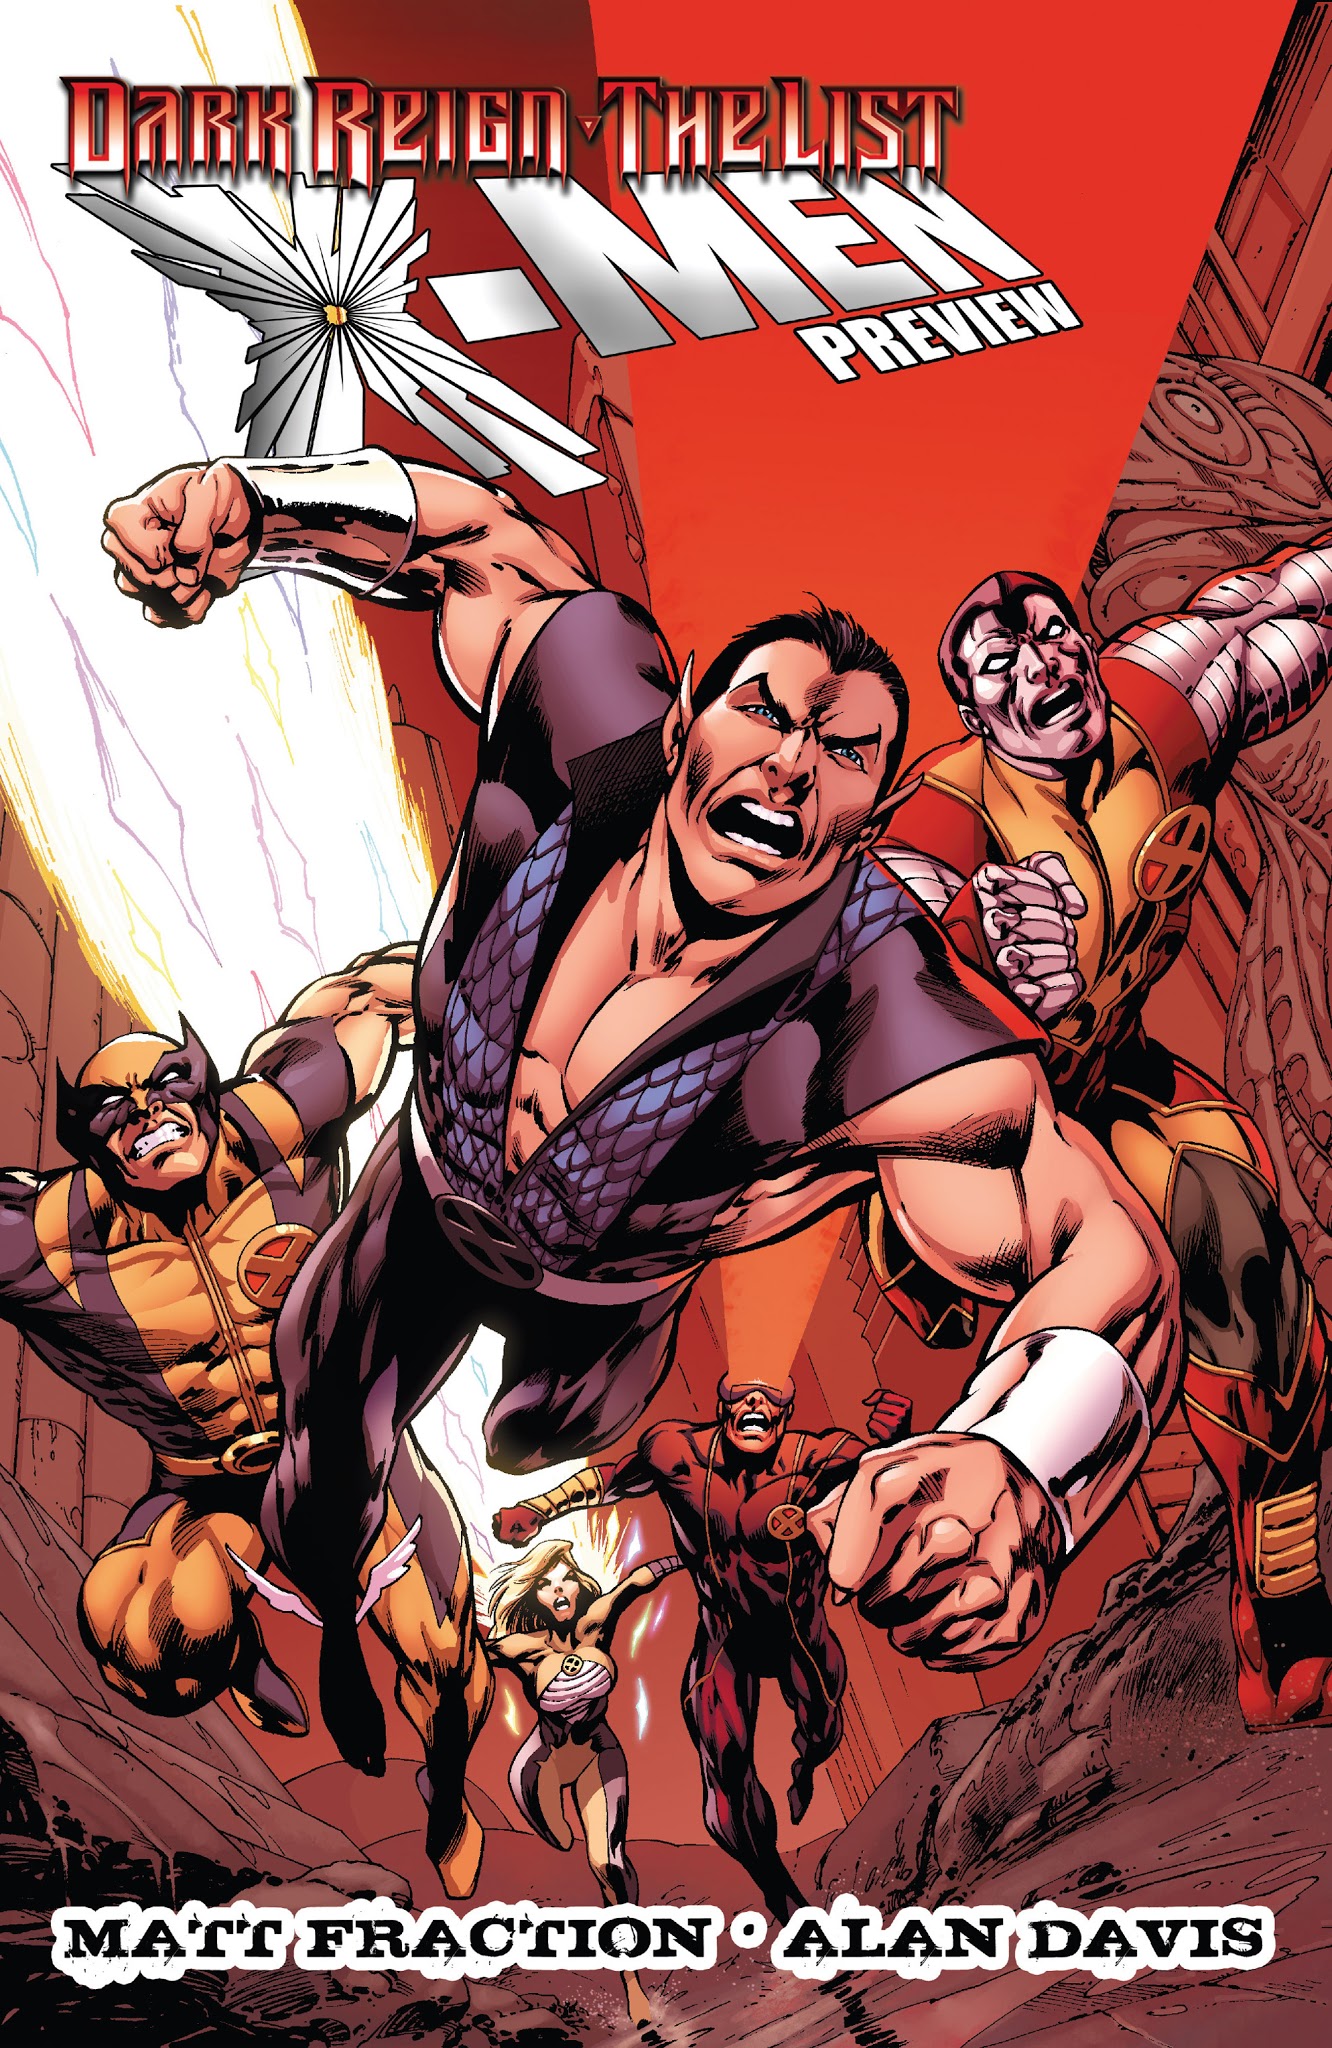 Read online Dark Reign: The List comic -  Issue # Issue Avengers - 33